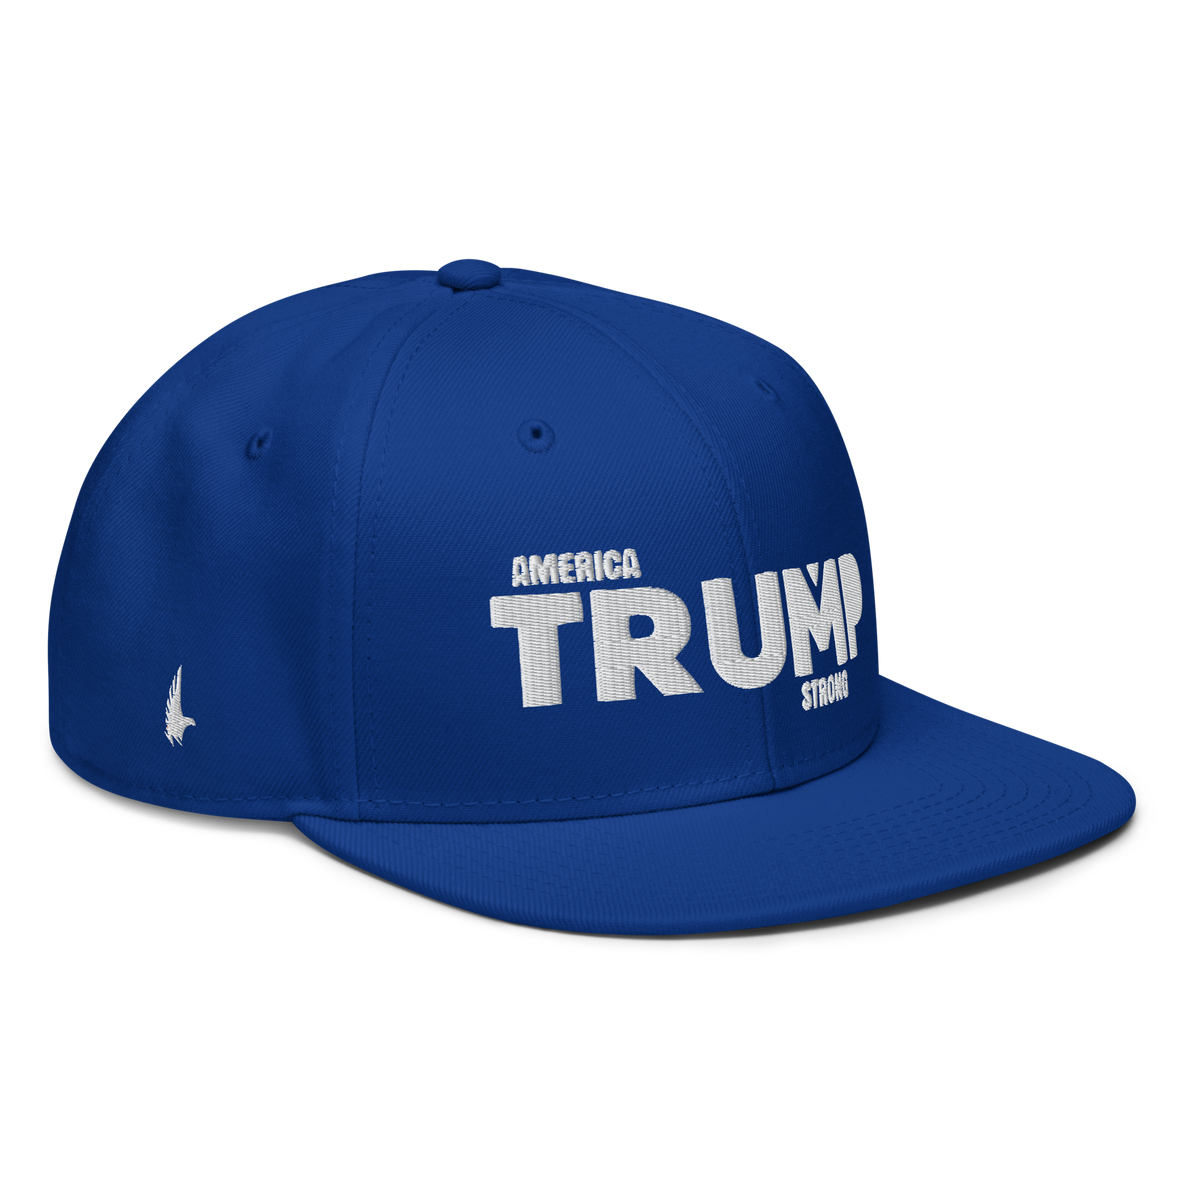 Loyalty Vibes America Trump Strong Snapback Hat Blue One size - Loyalty Vibes